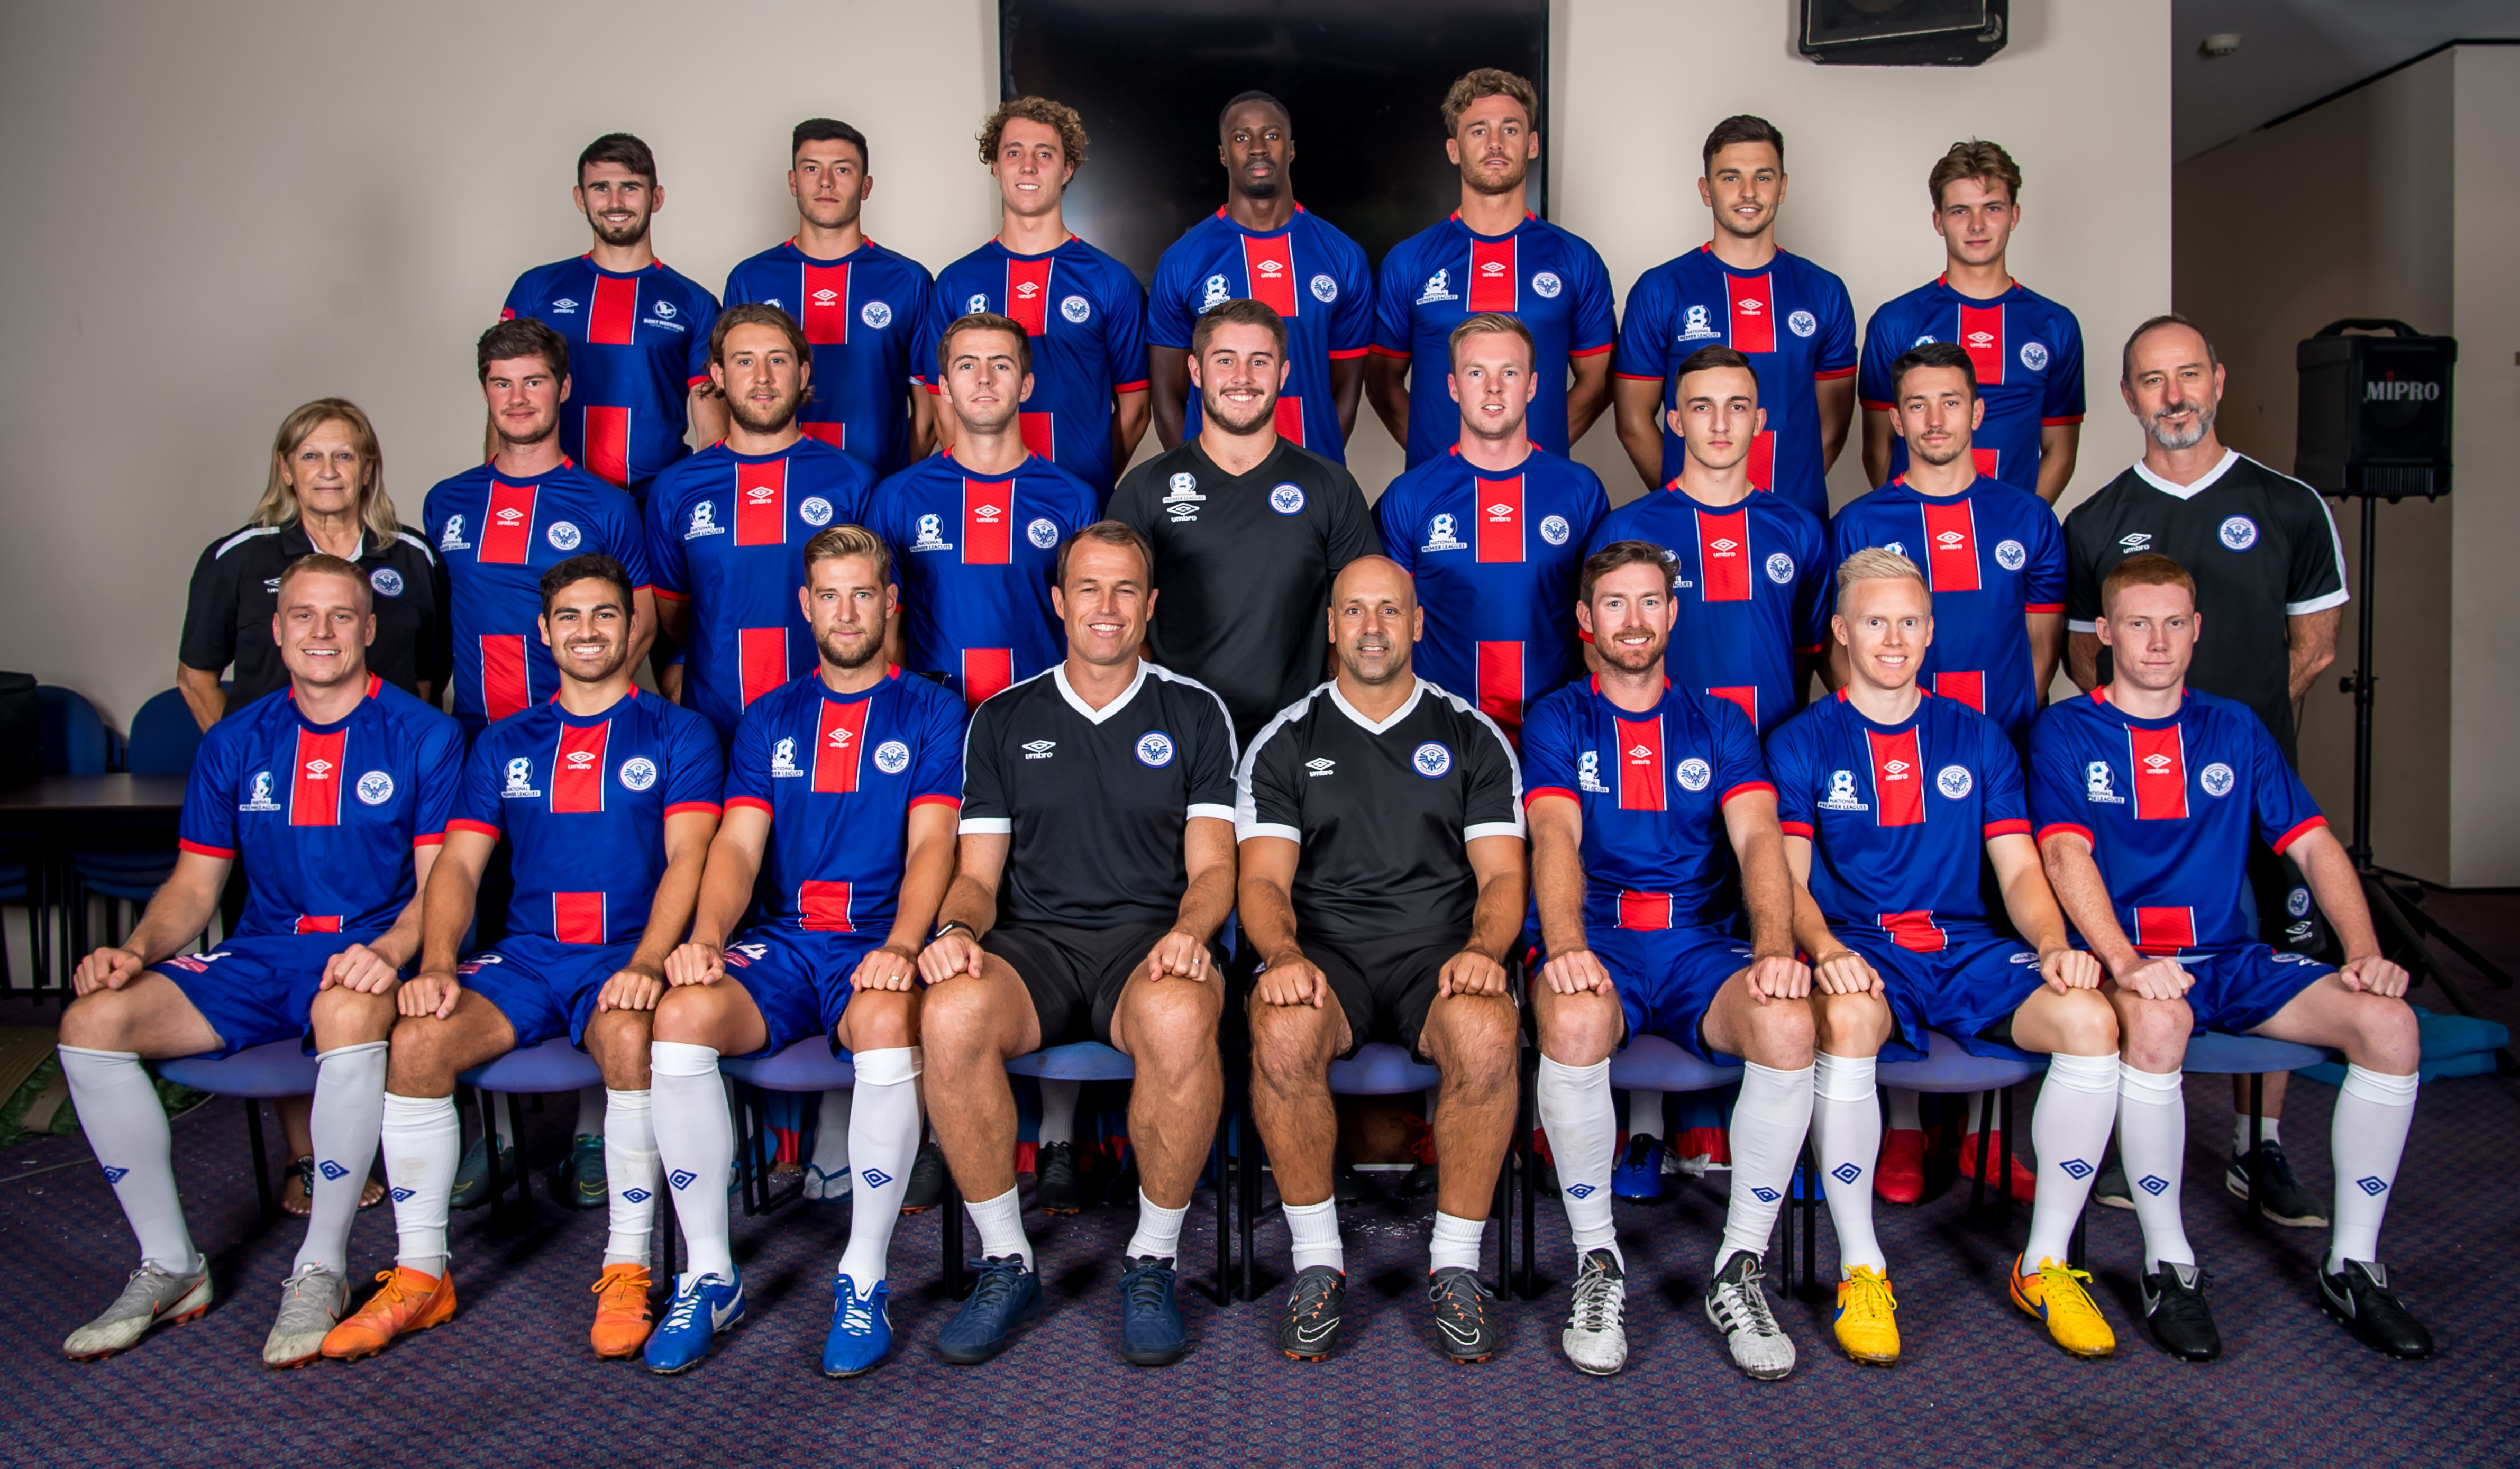 Manly United want to emulate 2017 success - NPL NSW Men's